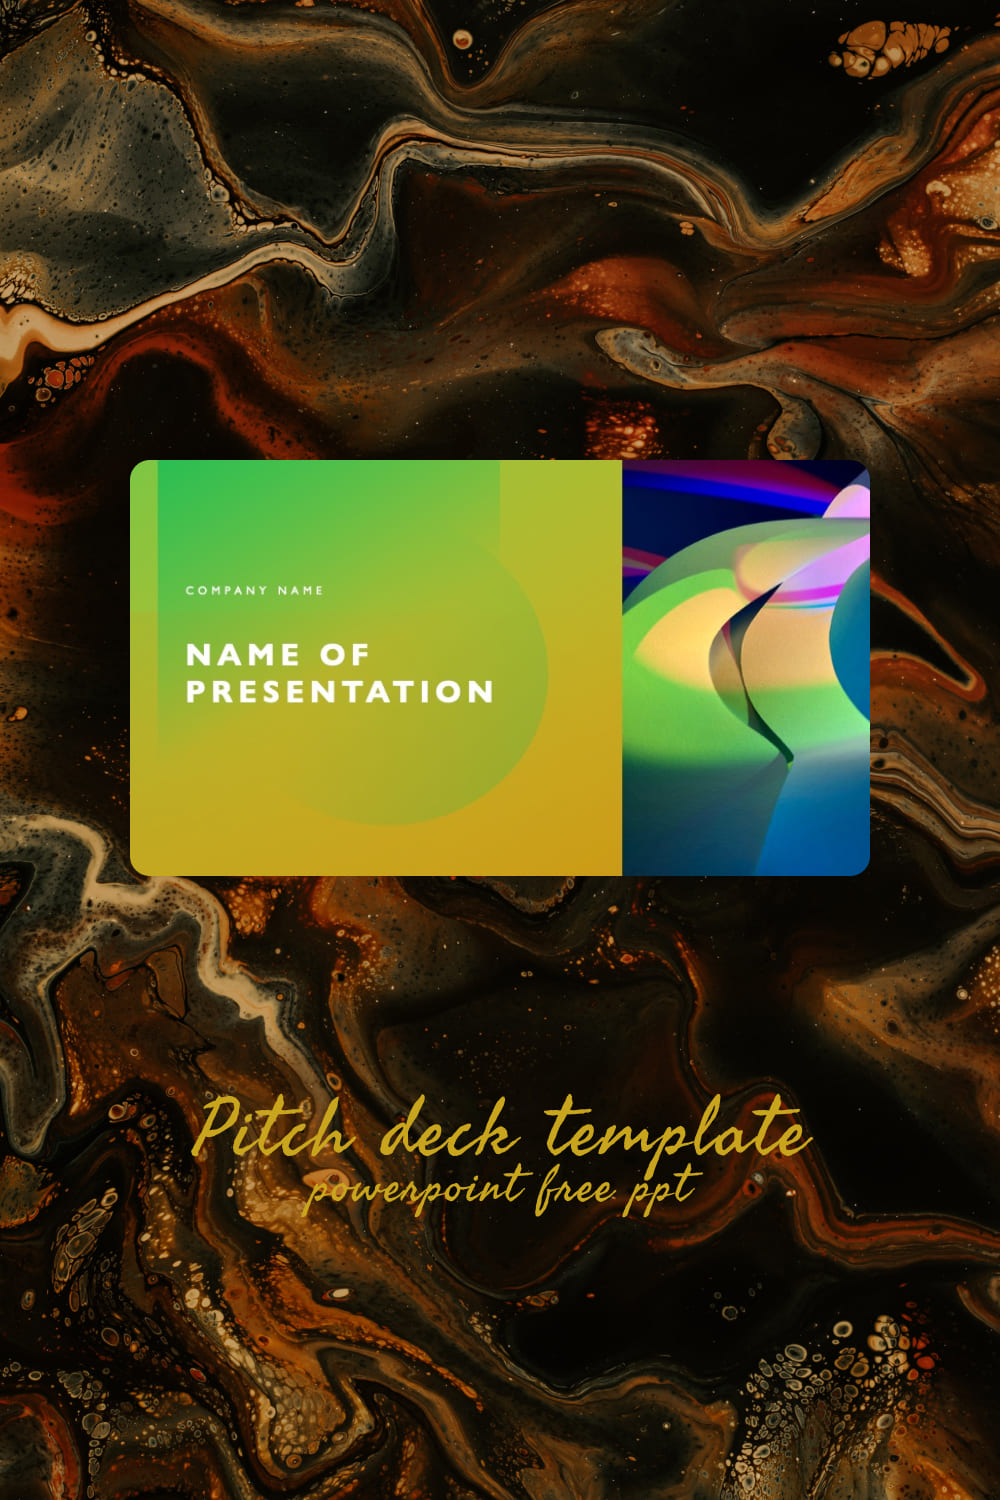 Pinterest Pitch Deck Template Powerpoint Free PPT.